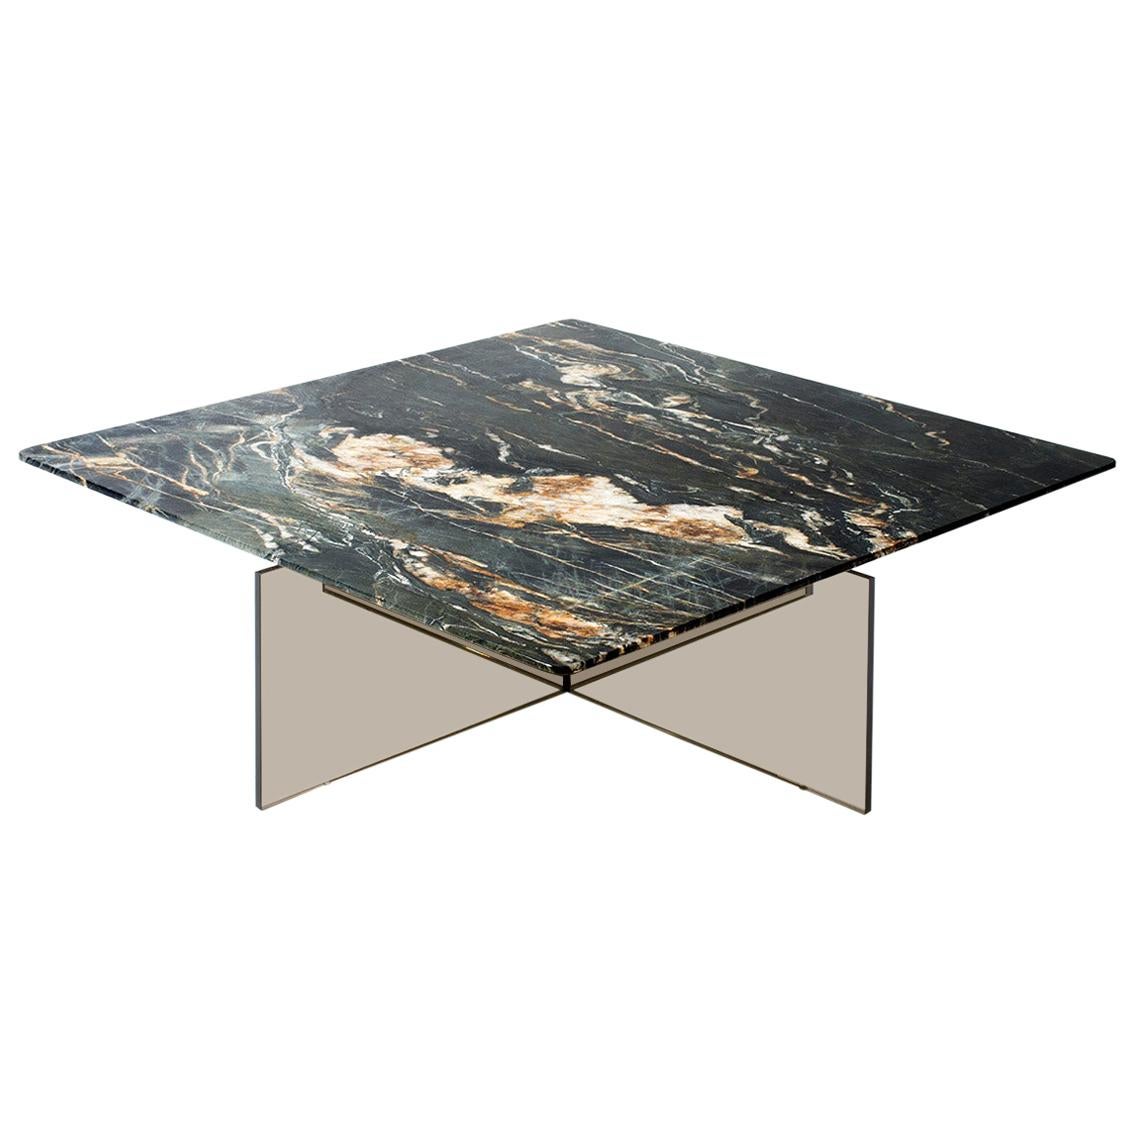 Claste Beside Myself Large Coffee Table in Belvedere Black Marble and Glass Base